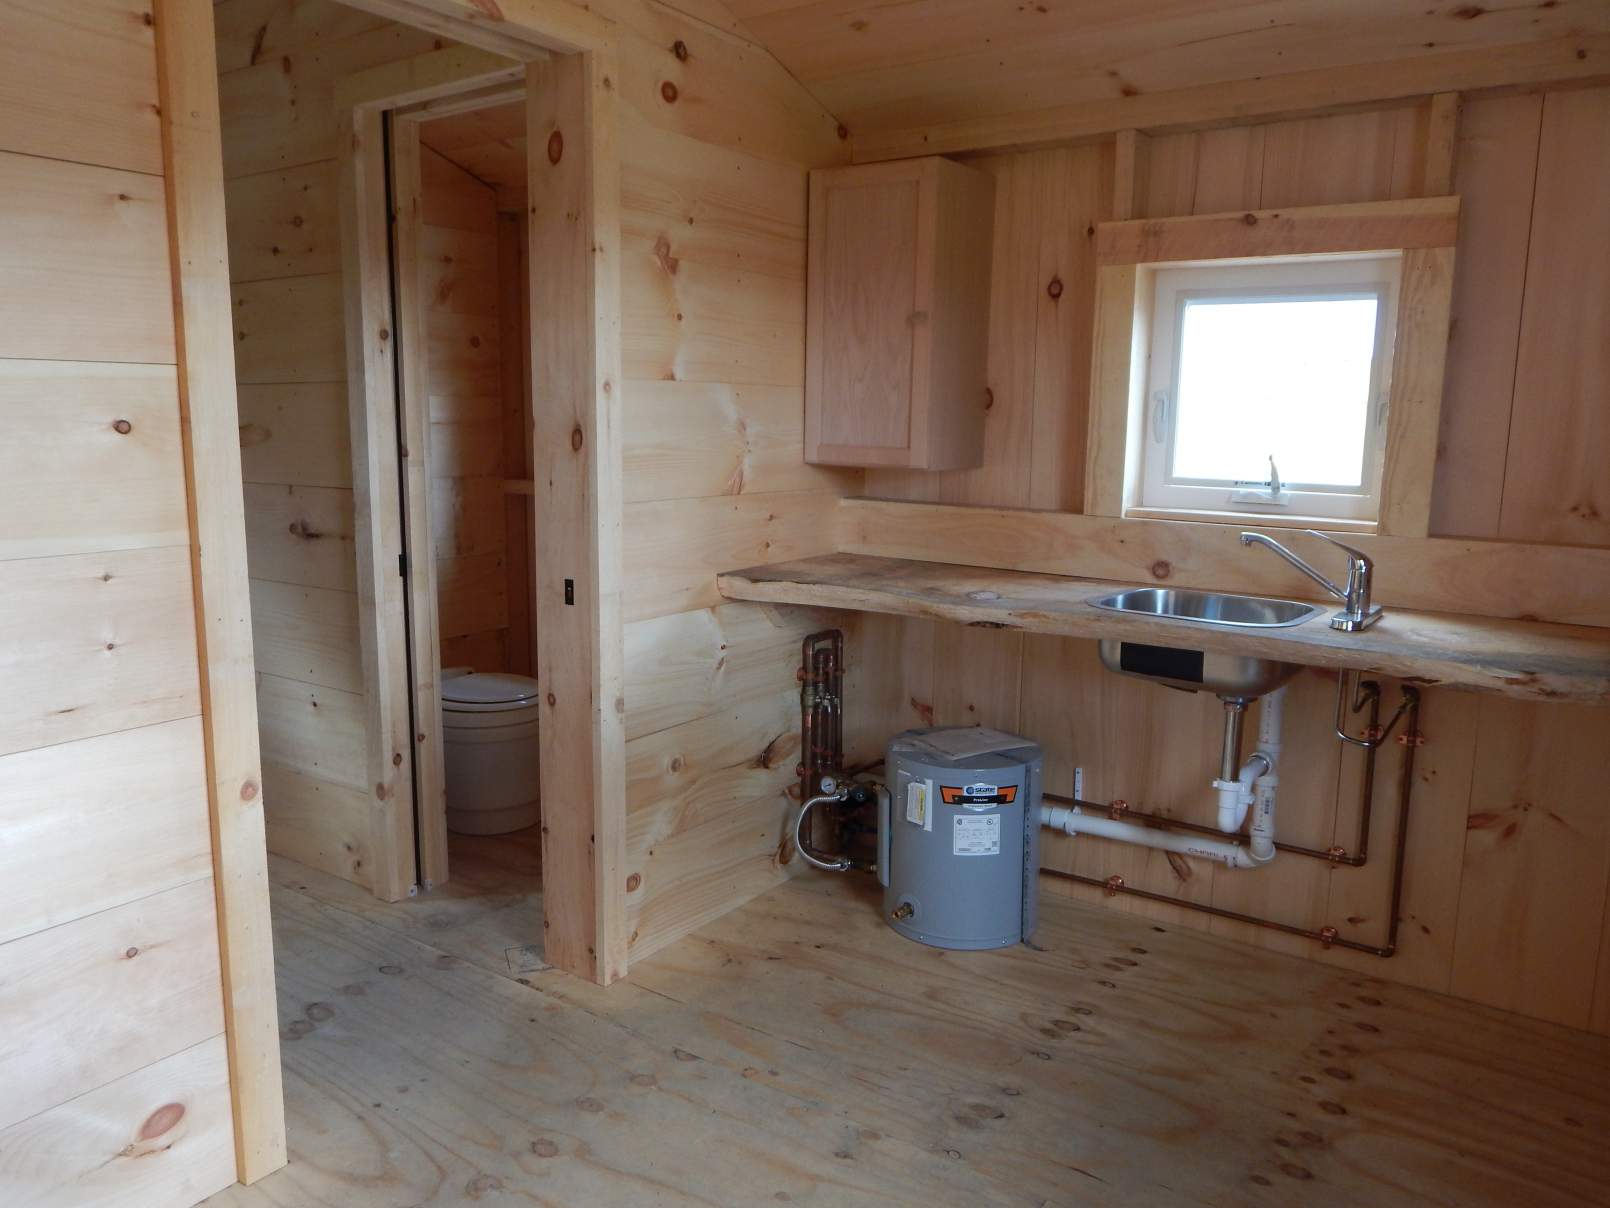 This simple cabin comes with a bare bones kitchenette and off-grid bathroom.